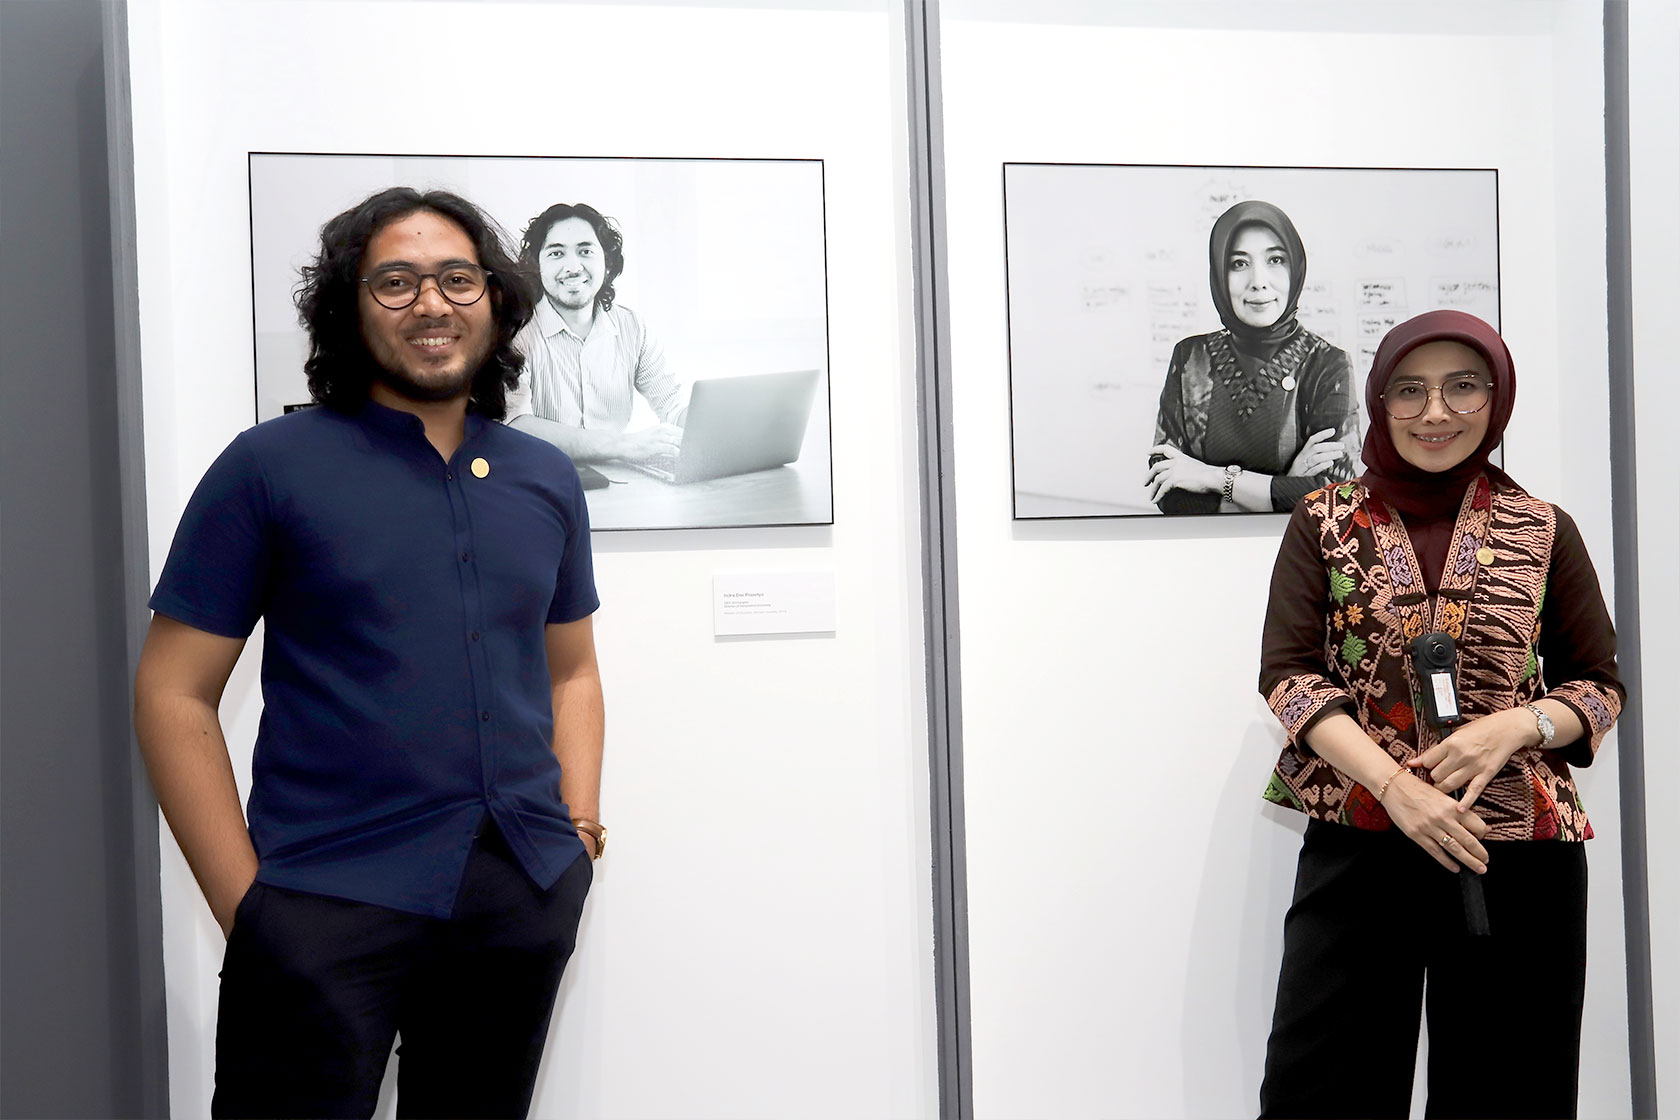 Notable Alumni Indra Dwi Prasetyo and Rahayu Puspasari pose with pride in front of their photos.